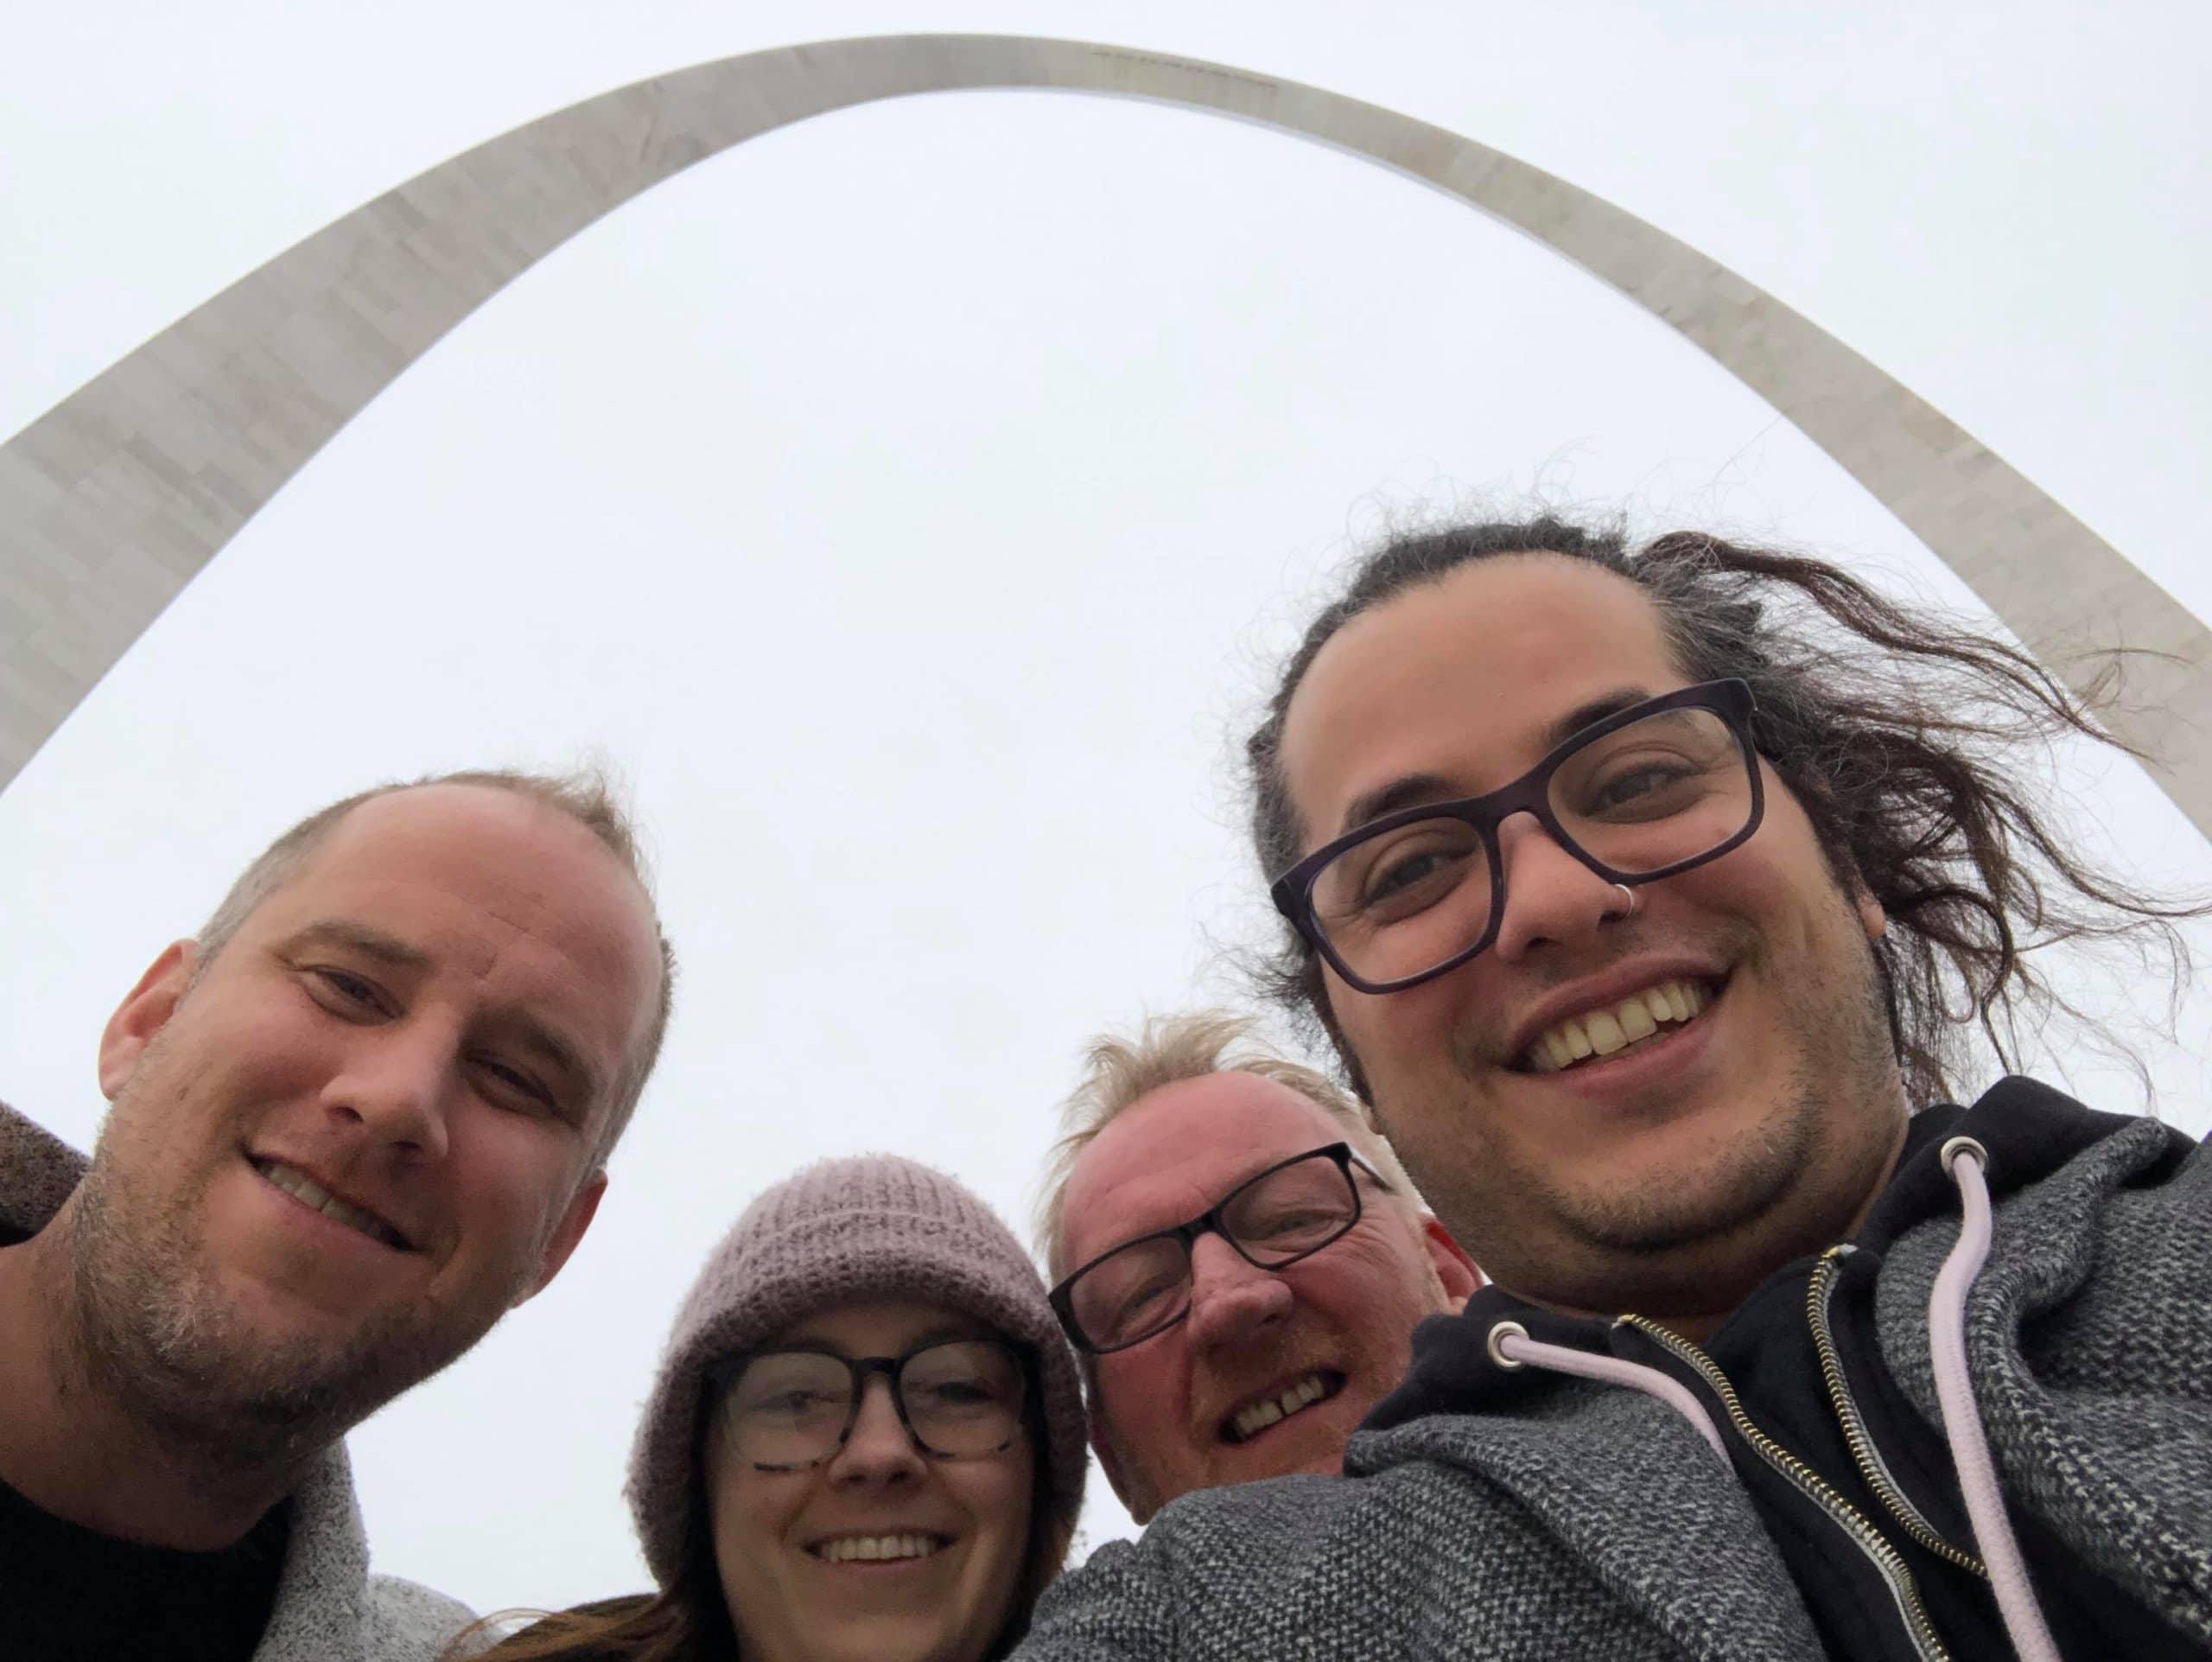 Hans, Vito, Andrew and Donata by the St. Louis arch